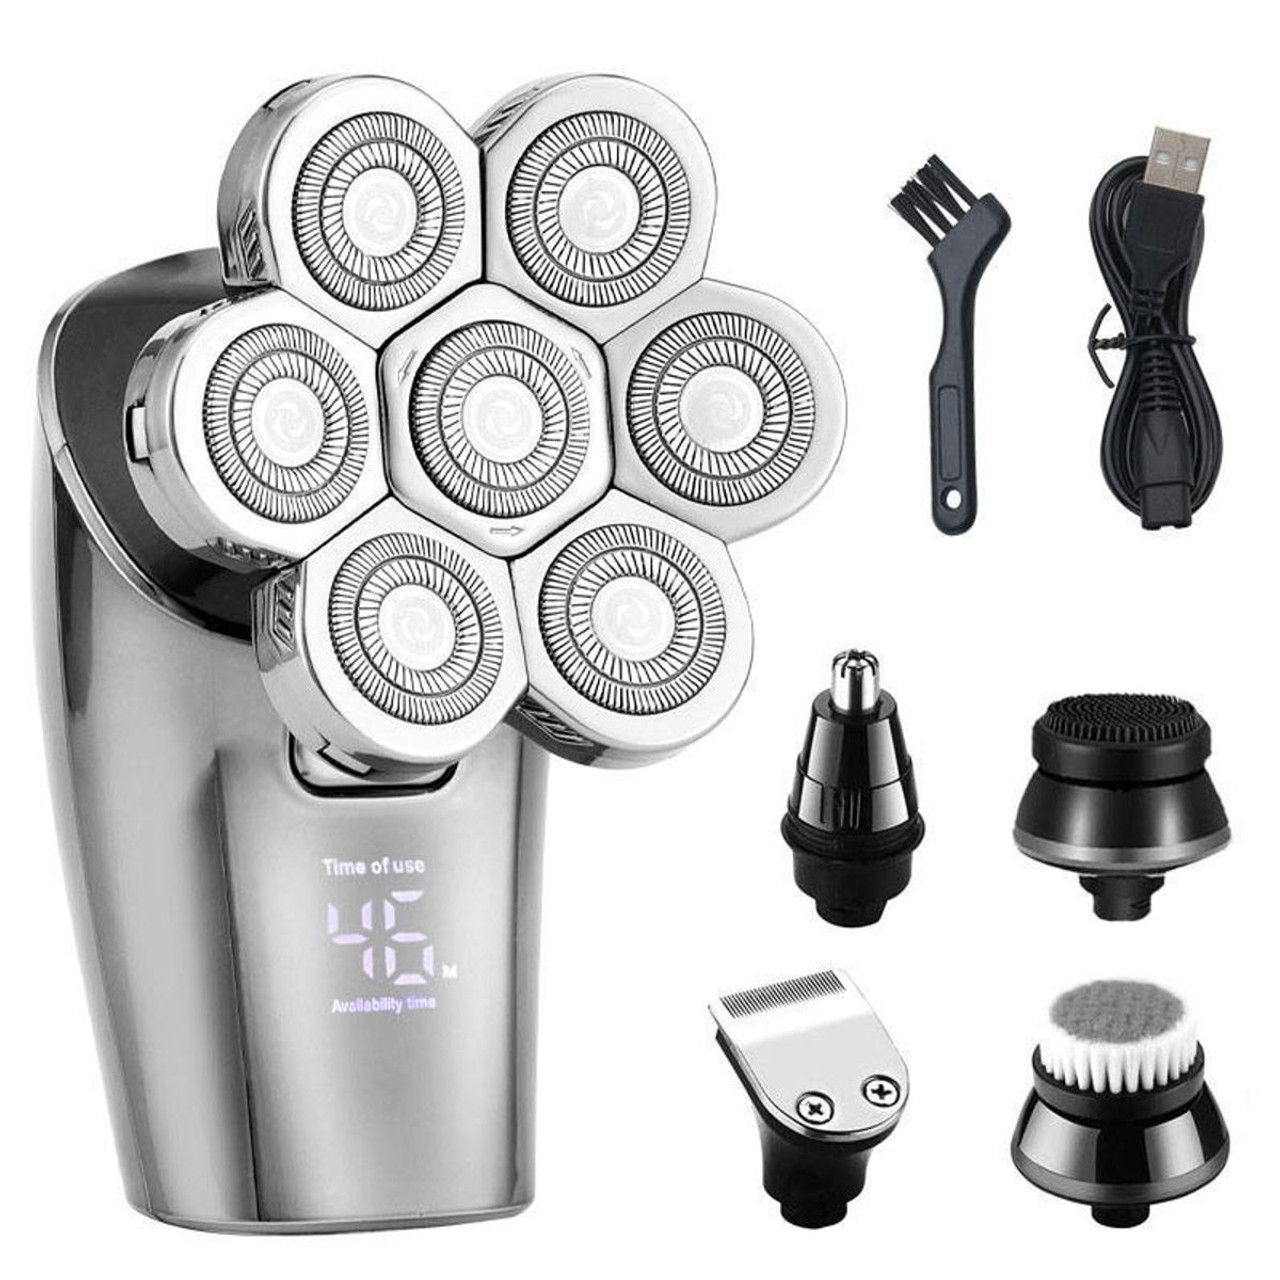 7- Head Shavers 5-in-1 Electric Head Razors for Men Shaver Rechargeable  Electric Portable Travel Shaver Hair Trimmer product image